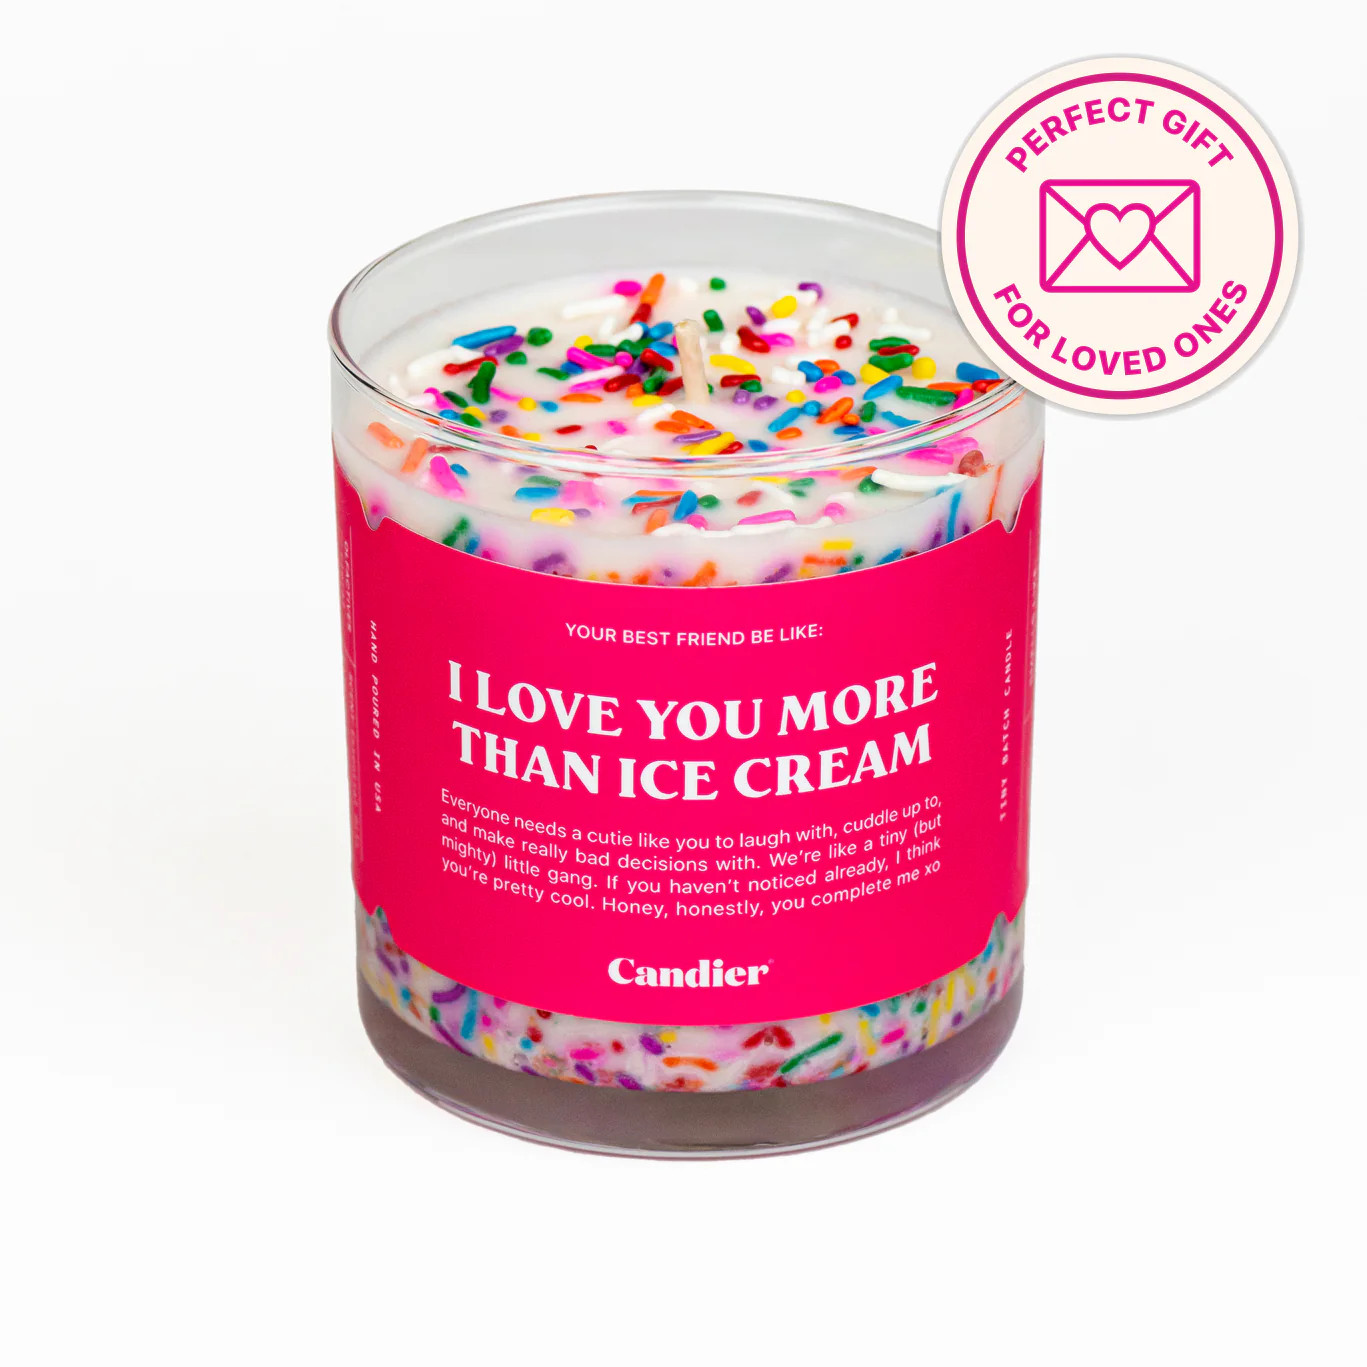 I LOVE YOU MORE THAN ICE CREAM CANDLE | Candier by Ryan Porter